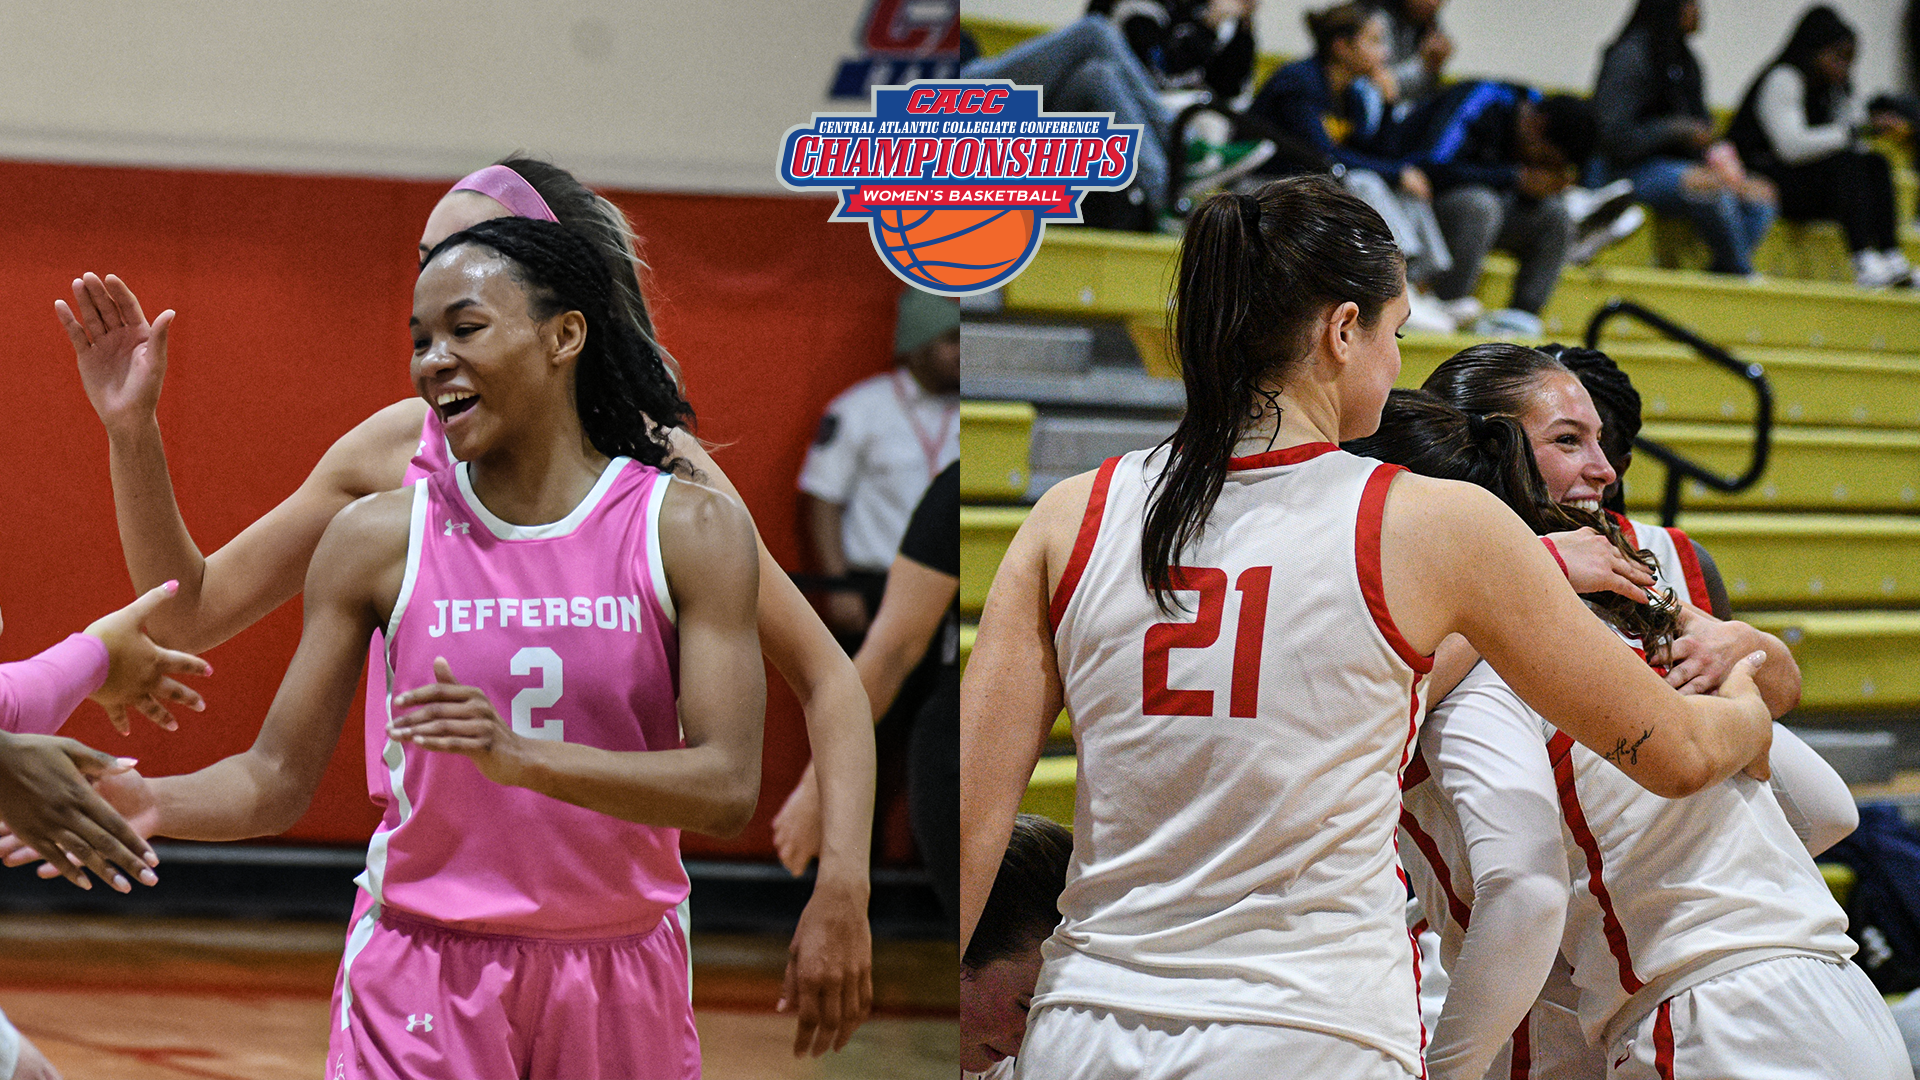 JEFFERSON AND CHESTNUT HILL ADVANCE TO CACC WOMEN’S BASKETBALL CHAMPIONHIPS FINAL